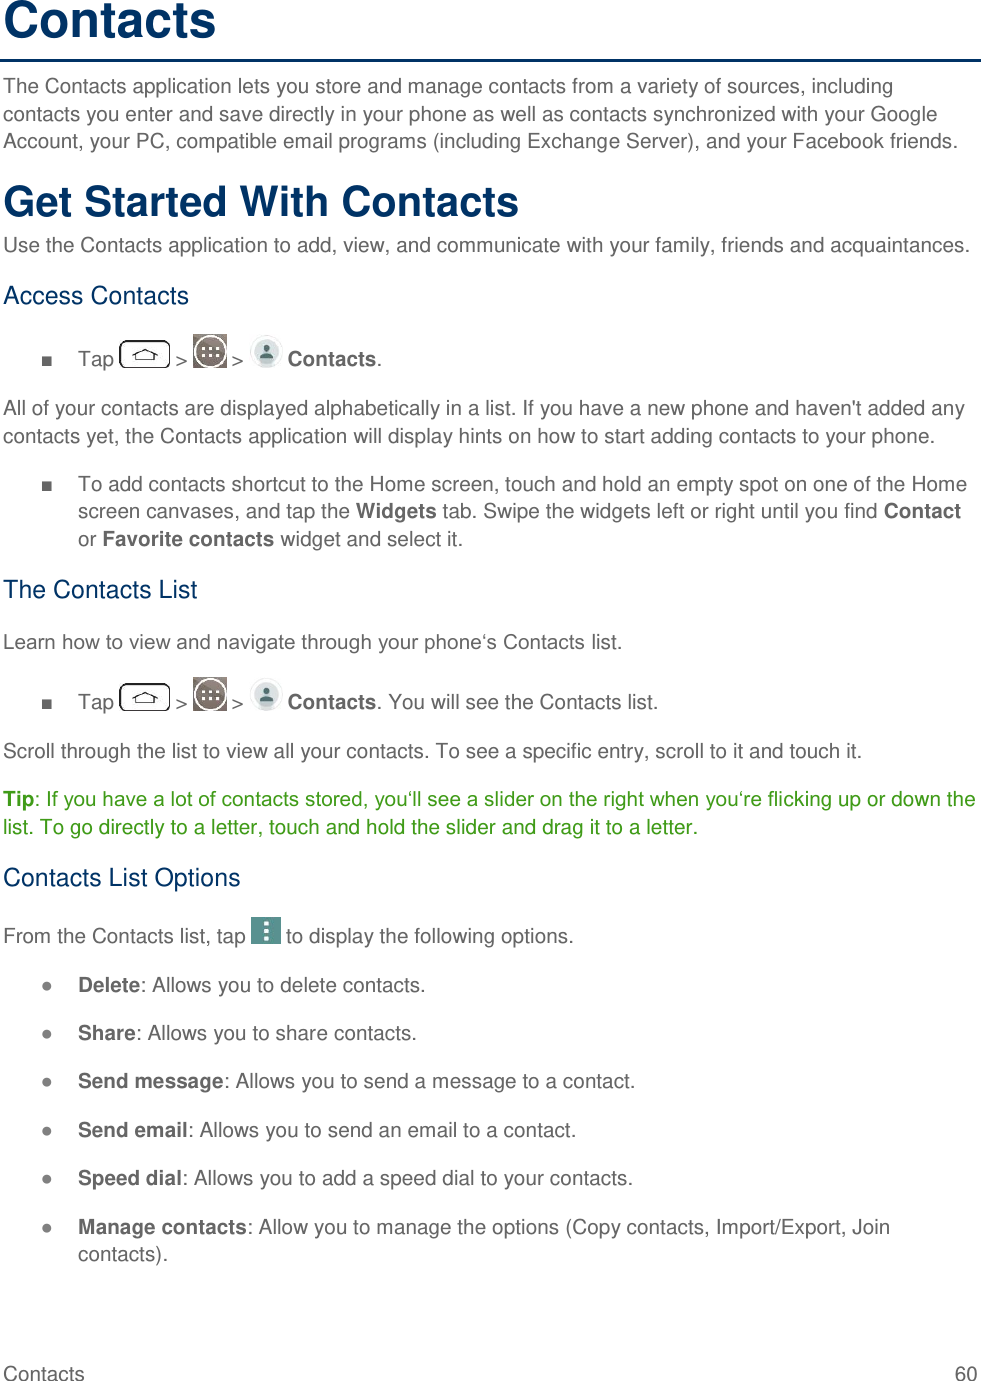 Contacts  60 Contacts The Contacts application lets you store and manage contacts from a variety of sources, including contacts you enter and save directly in your phone as well as contacts synchronized with your Google Account, your PC, compatible email programs (including Exchange Server), and your Facebook friends. Get Started With Contacts Use the Contacts application to add, view, and communicate with your family, friends and acquaintances. Access Contacts ■  Tap   &gt;   &gt;   Contacts. All of your contacts are displayed alphabetically in a list. If you have a new phone and haven&apos;t added any contacts yet, the Contacts application will display hints on how to start adding contacts to your phone. ■  To add contacts shortcut to the Home screen, touch and hold an empty spot on one of the Home screen canvases, and tap the Widgets tab. Swipe the widgets left or right until you find Contact or Favorite contacts widget and select it. The Contacts List Learn how to view and navigate through your phone‗s Contacts list. ■  Tap   &gt;   &gt;   Contacts. You will see the Contacts list. Scroll through the list to view all your contacts. To see a specific entry, scroll to it and touch it. Tip: If you have a lot of contacts stored, you‗ll see a slider on the right when you‗re flicking up or down the list. To go directly to a letter, touch and hold the slider and drag it to a letter. Contacts List Options From the Contacts list, tap   to display the following options. ● Delete: Allows you to delete contacts. ● Share: Allows you to share contacts. ● Send message: Allows you to send a message to a contact. ● Send email: Allows you to send an email to a contact. ● Speed dial: Allows you to add a speed dial to your contacts. ● Manage contacts: Allow you to manage the options (Copy contacts, Import/Export, Join contacts). 